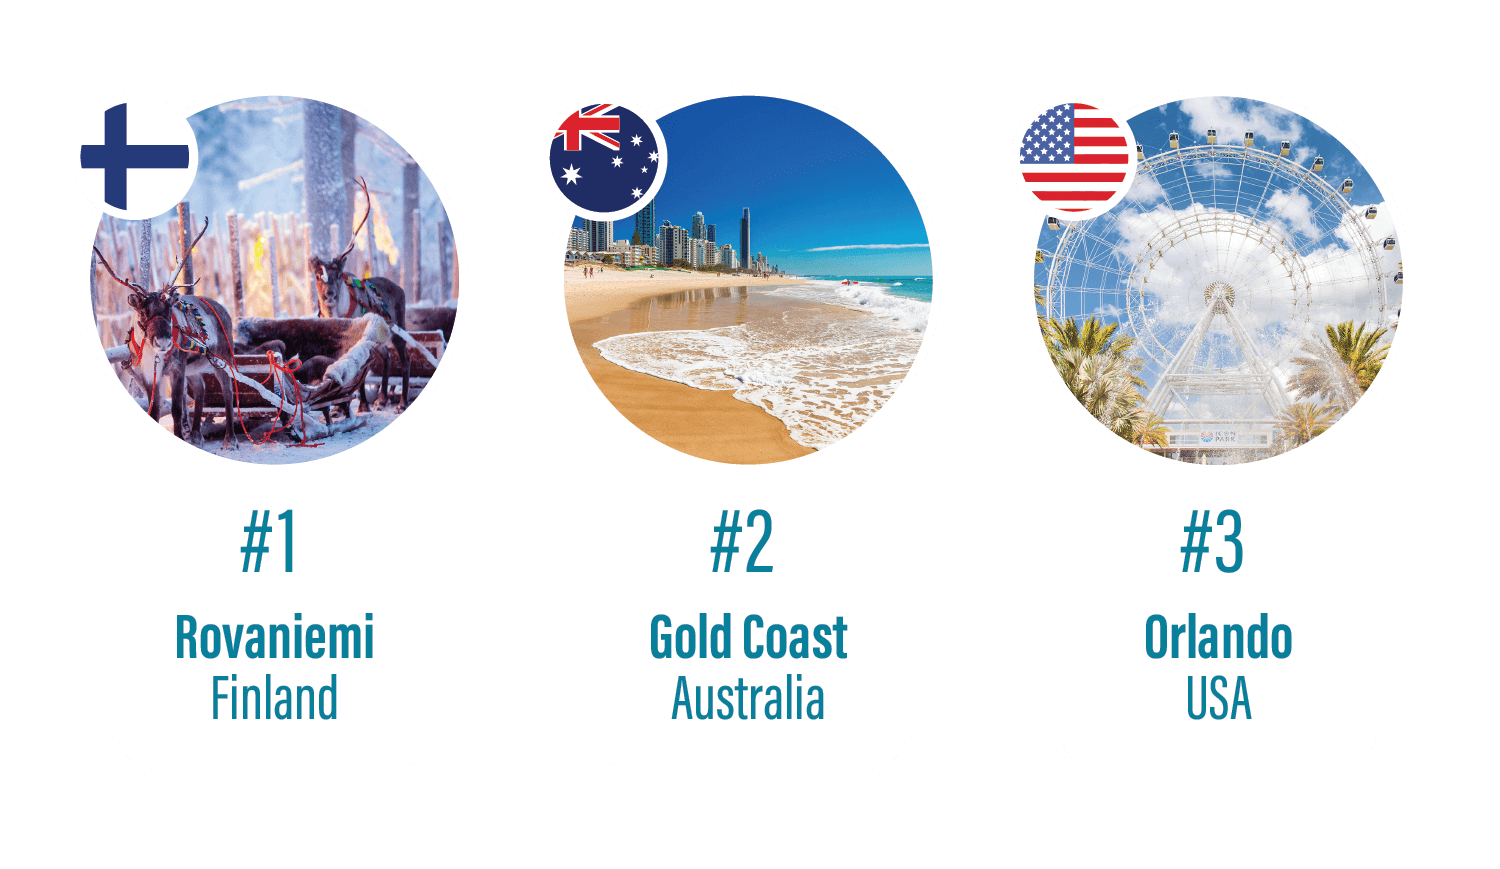 Graphic showing Rovaniemi, the Gold Coast and Orlando as the top three destinations with biggest price increase.